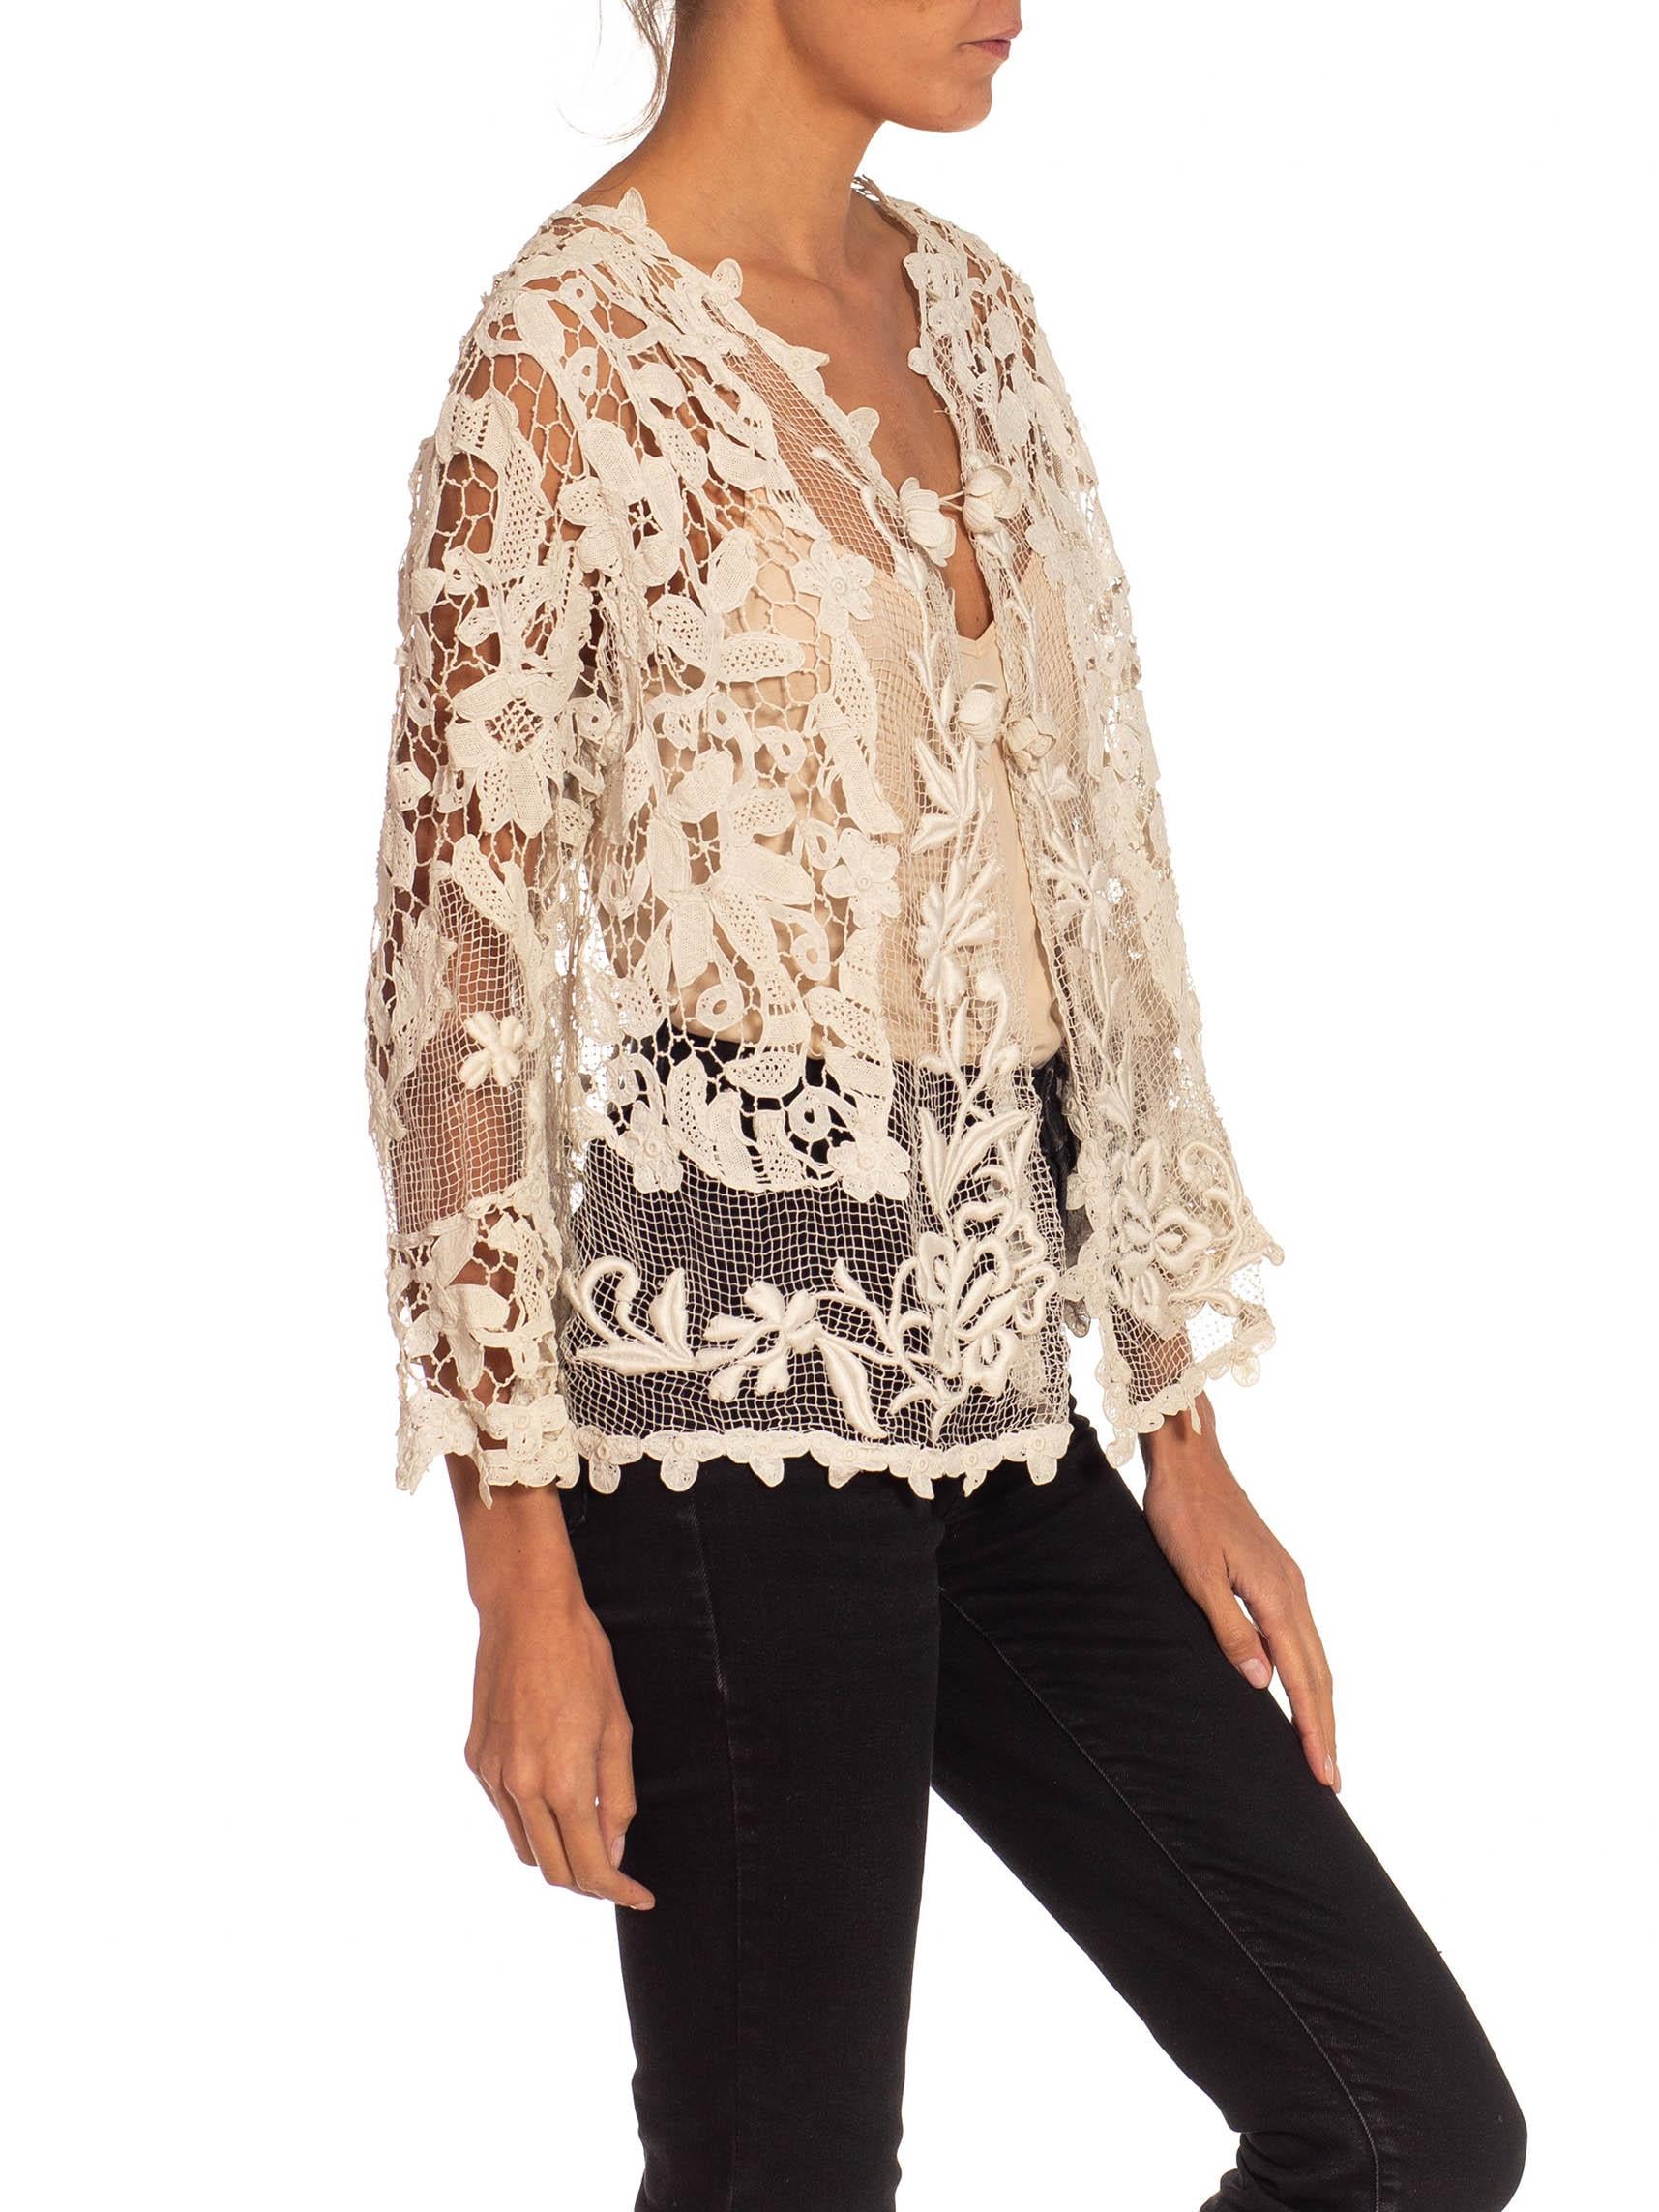 Victorian Off White Needle Lace Long Sleeve Jacket With Flower Hooks For Sale 2